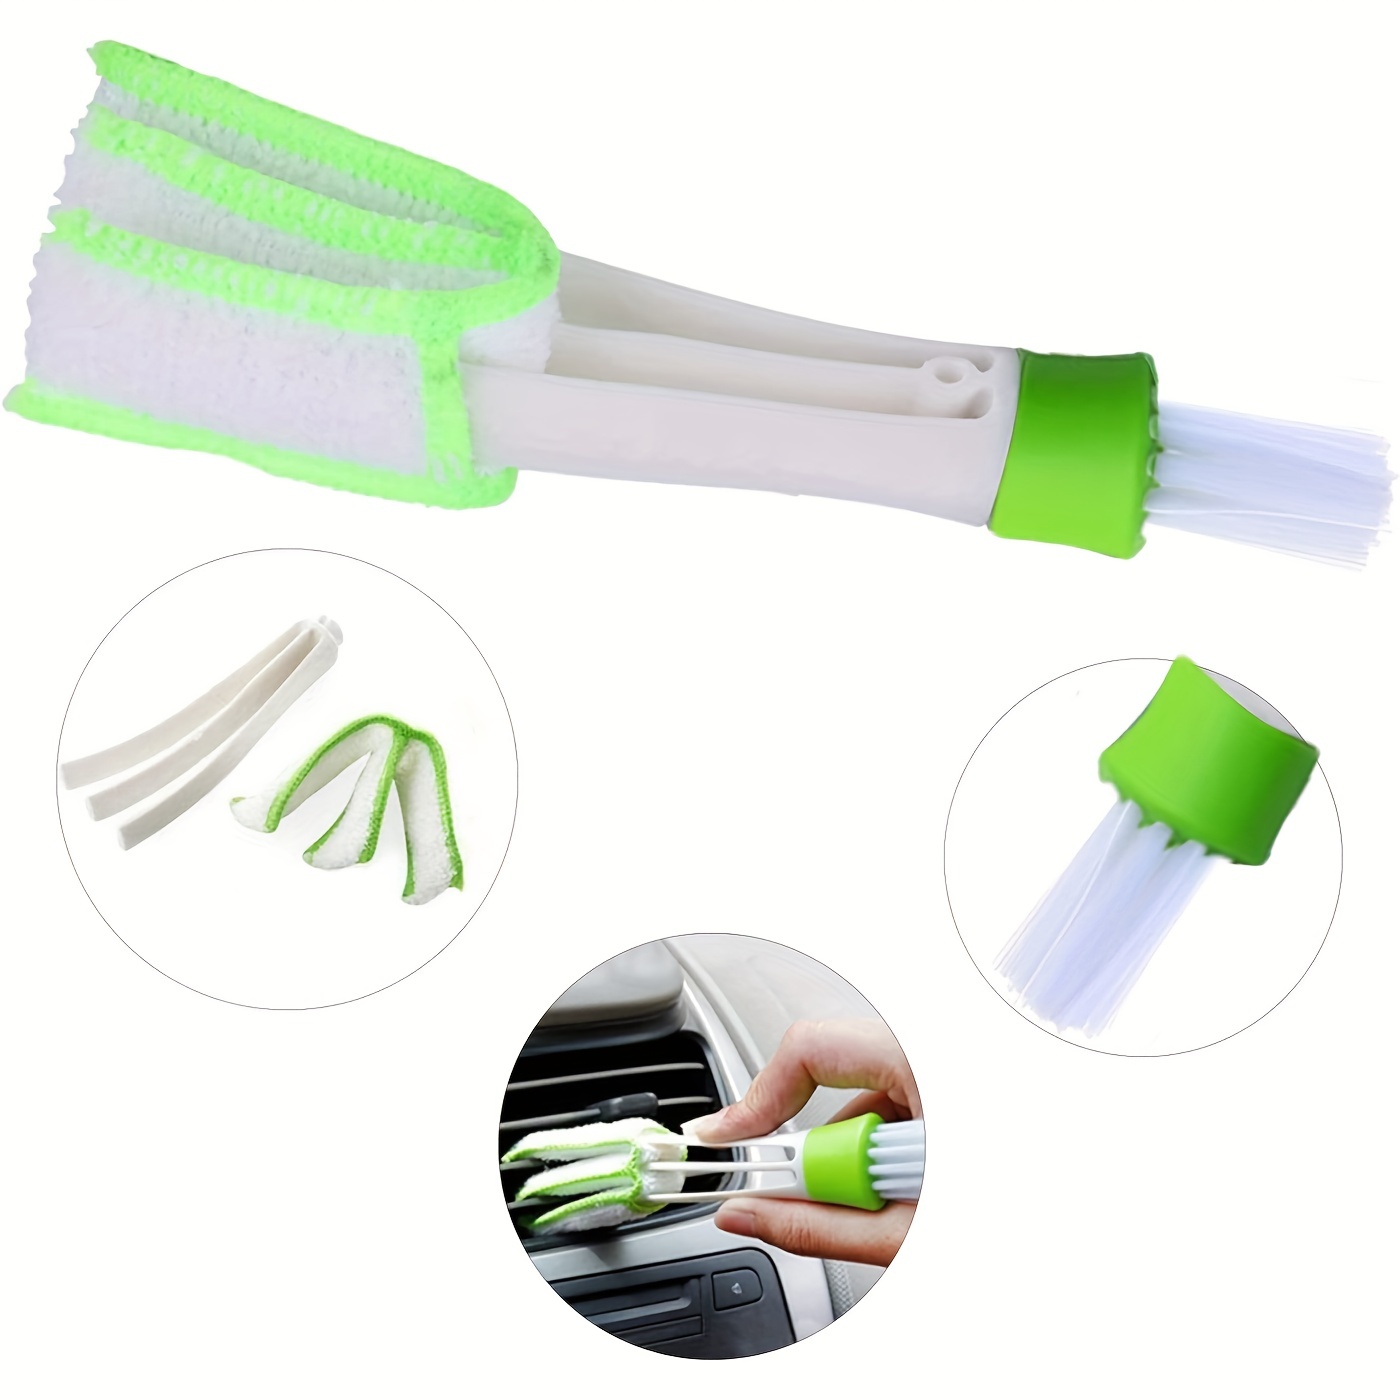  Gap Cleaning Brush Hand-held Crevice Cleaning Tools